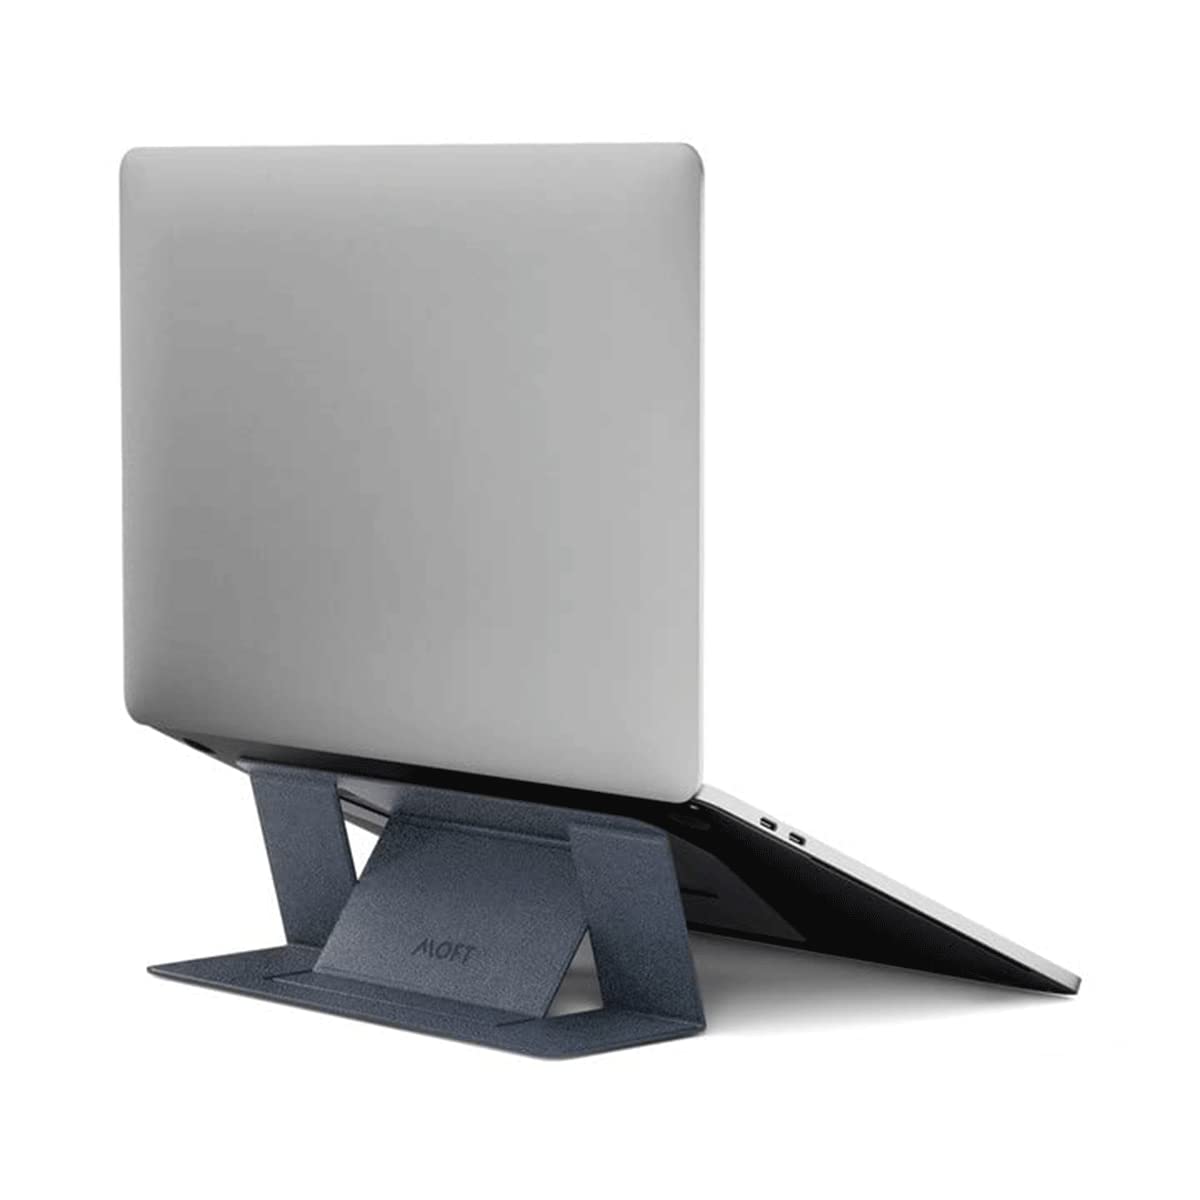 MOFT Tabletop Laptop Stand, Invisible Lightweight Laptop Computer Stand, Compatible for MacBook, Air, Pro, Tablets and Laptops up to 15.6, Patented, Starry Grey